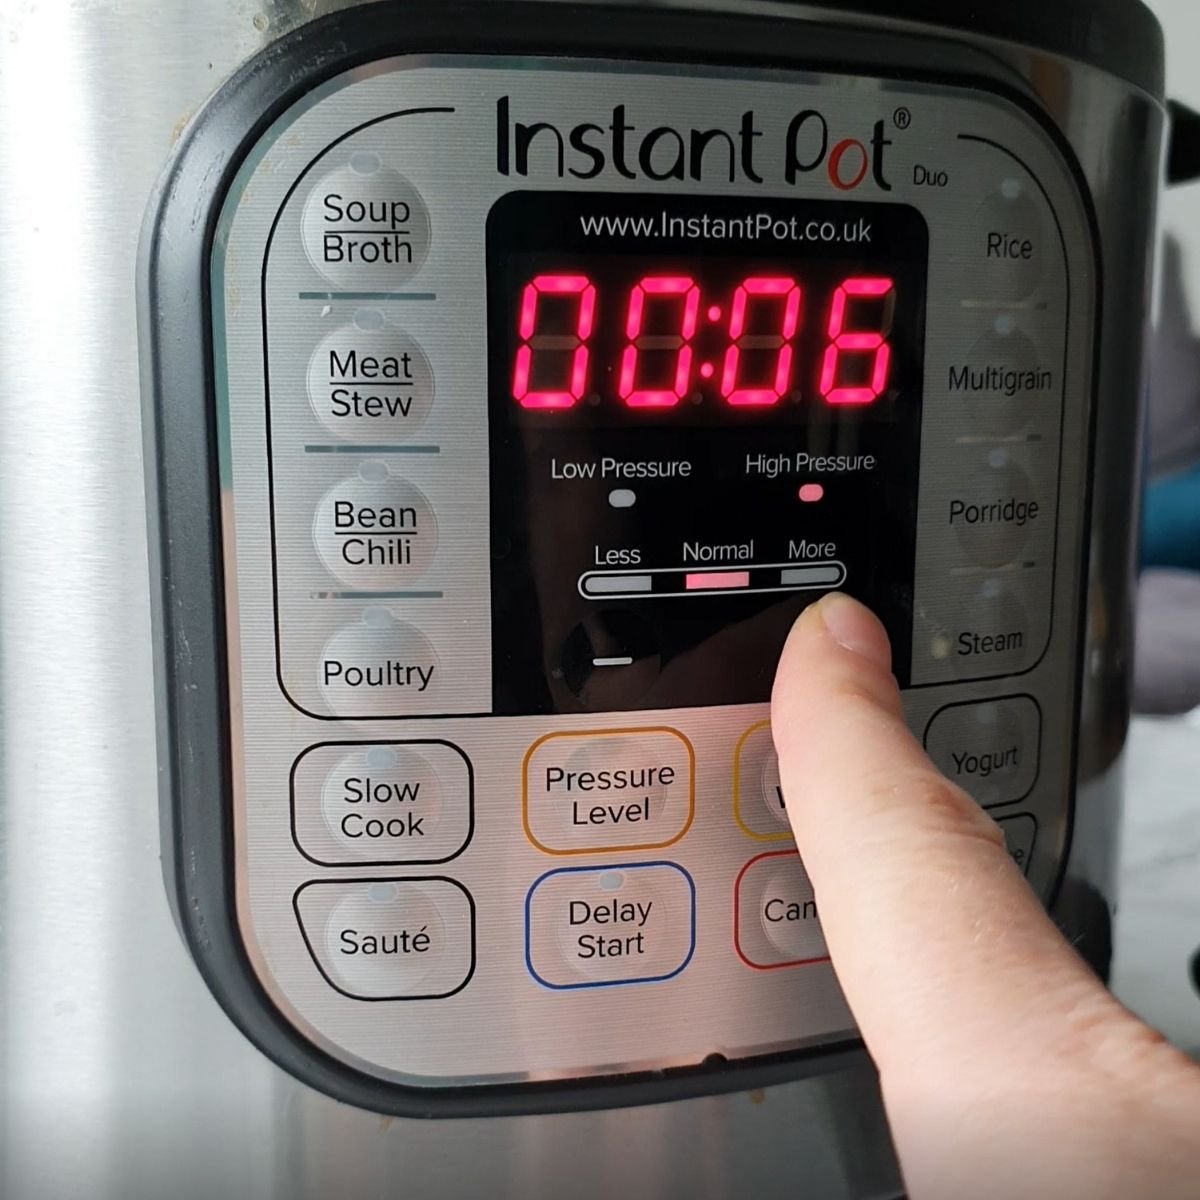 25 Instant Pot Tips, Tricks, and Hacks You Should Know